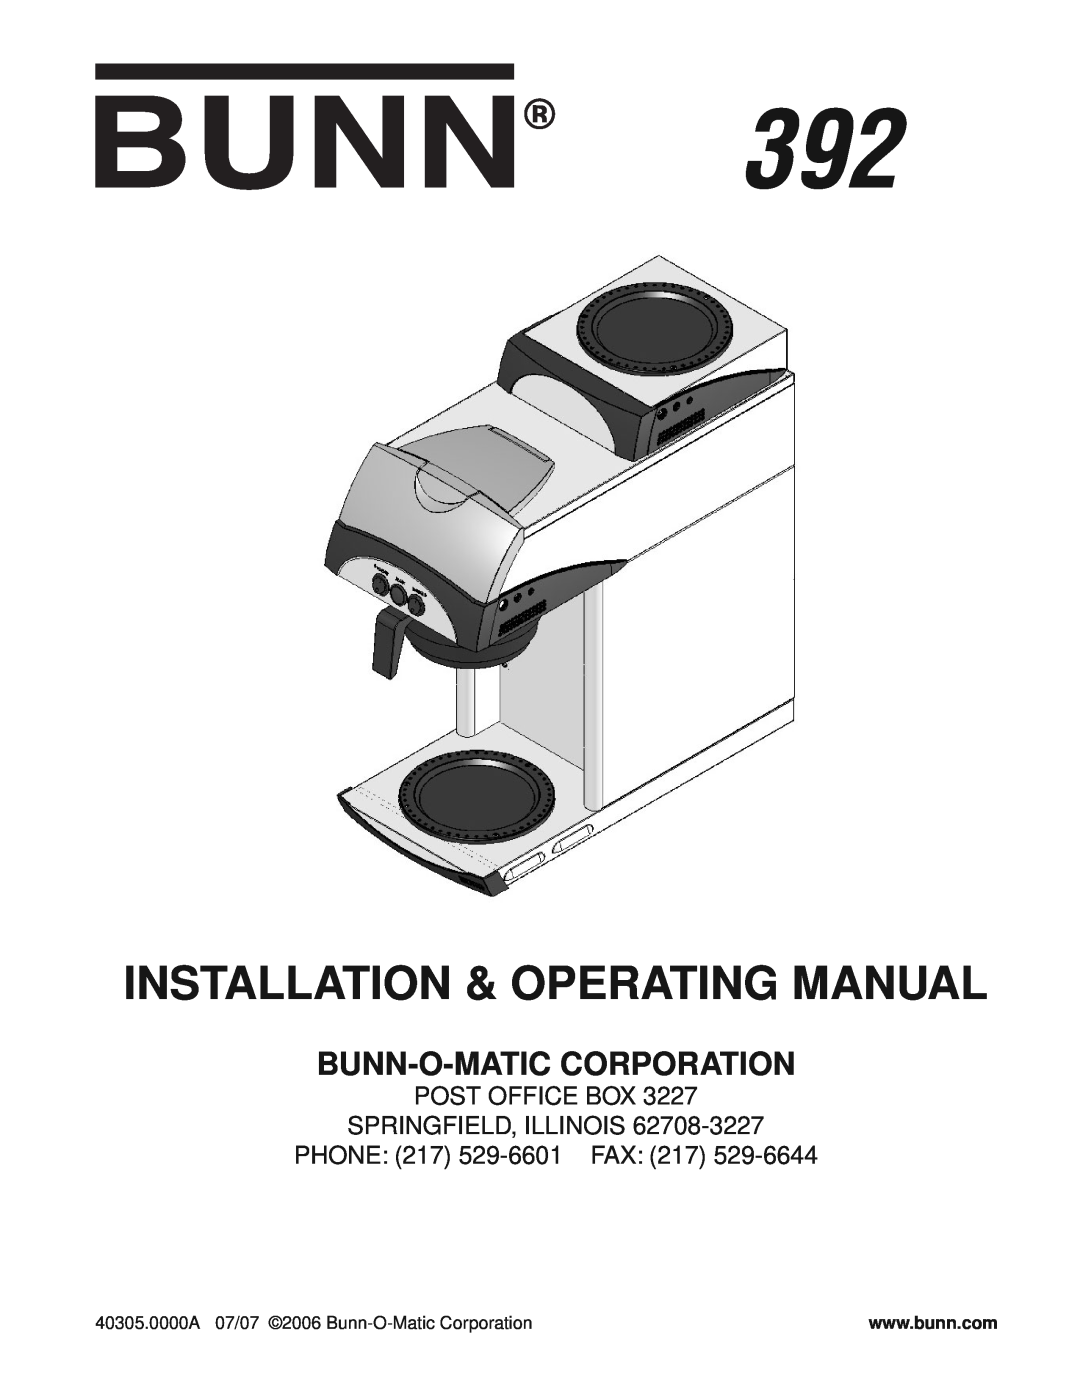 Bunn 392 specifications INTERNATIONAL Item#, Pourover Coffee Brewer with 2 Warmers, Features, Related Products 